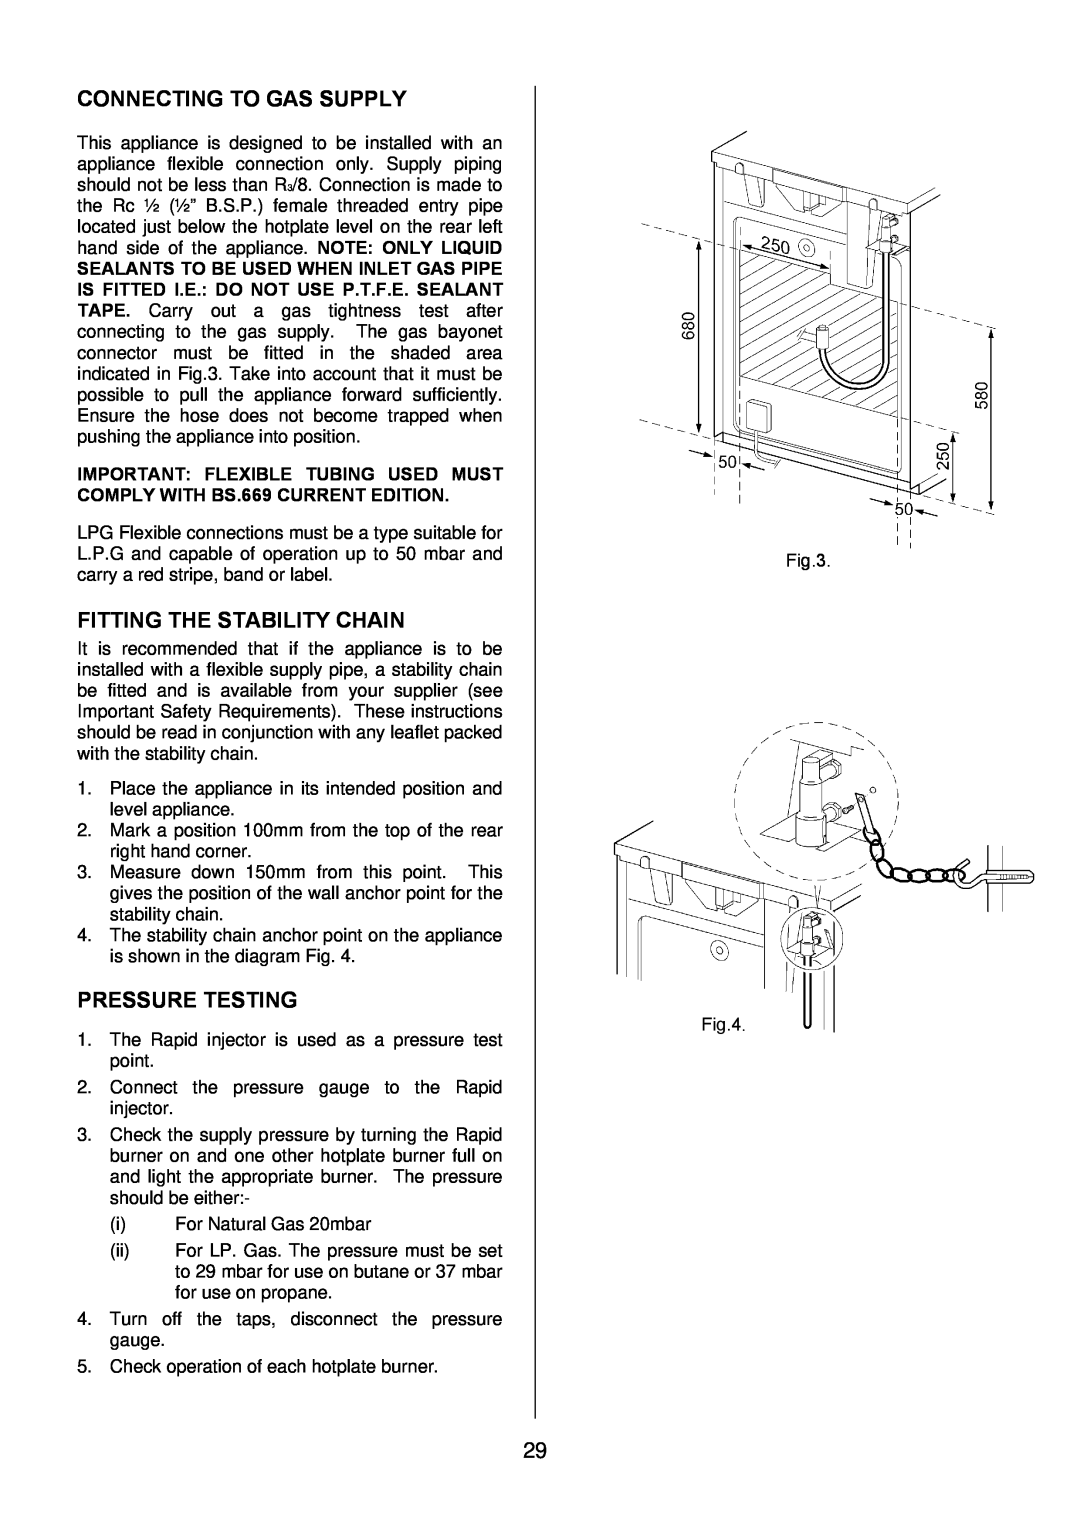 Electrolux EKG5542, EKG5543 manual Connecting To Gas Supply, Fitting The Stability Chain, Pressure Testing 